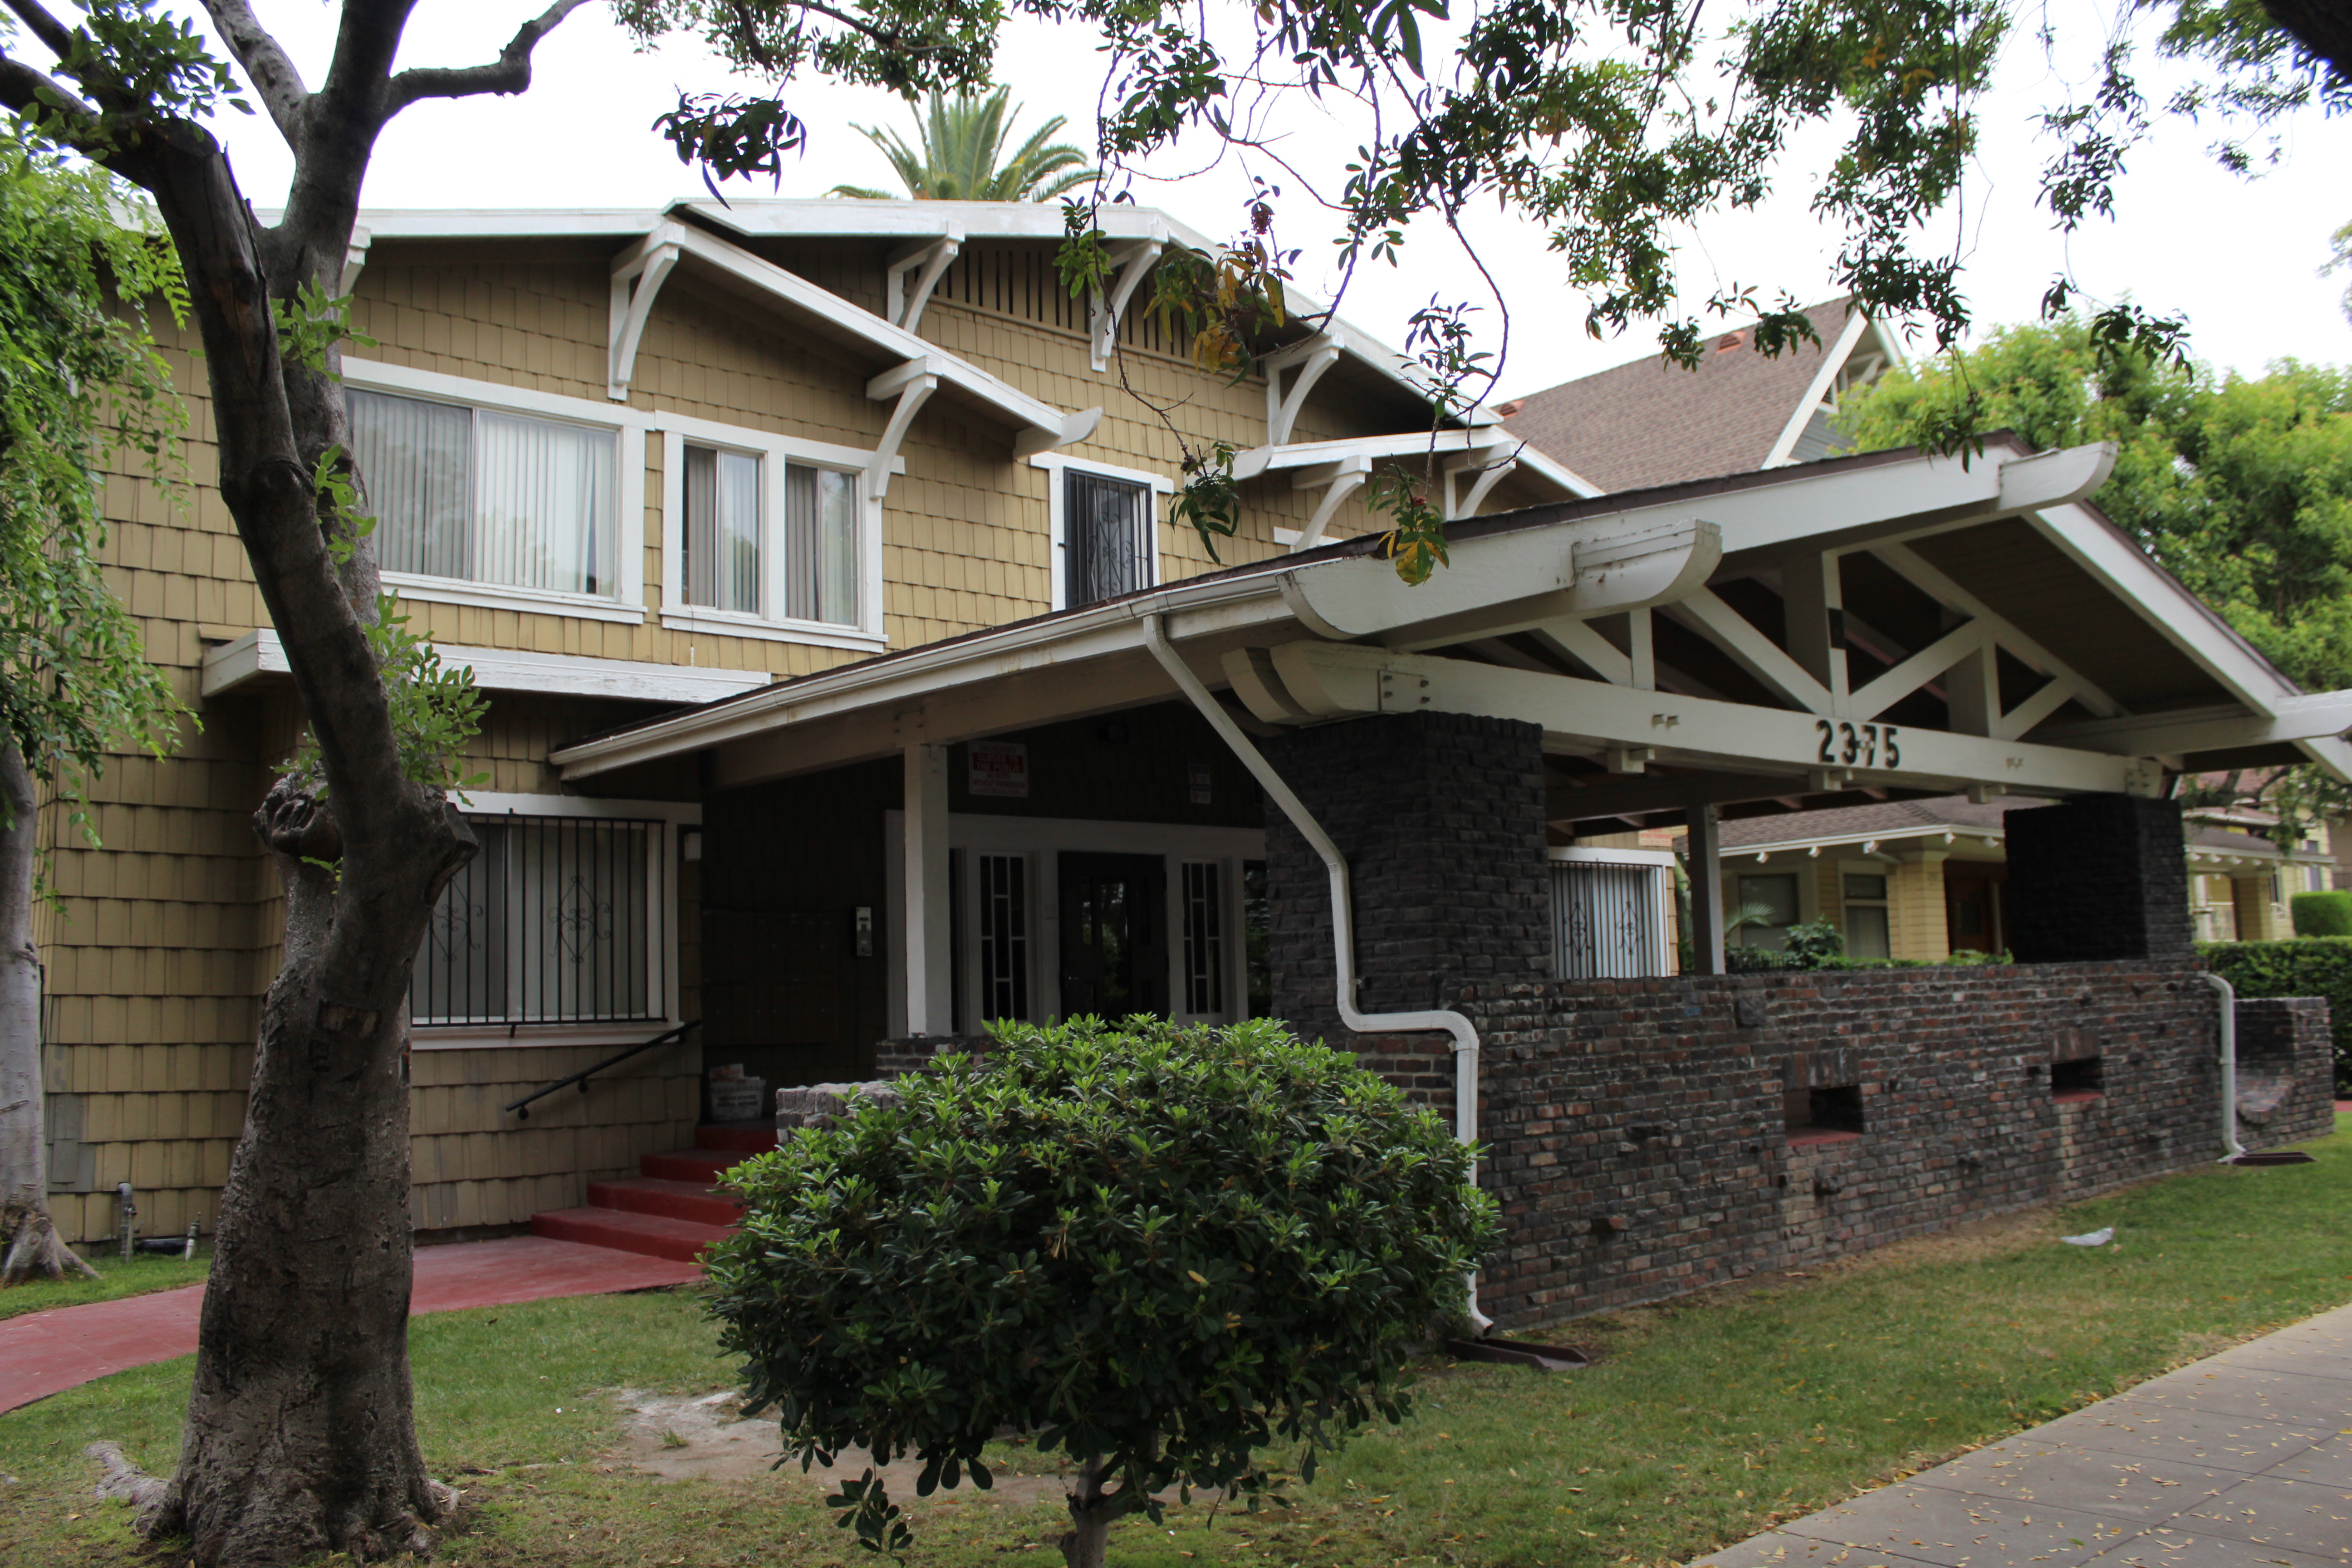 View of the front porch and the two story Craftsman style building.